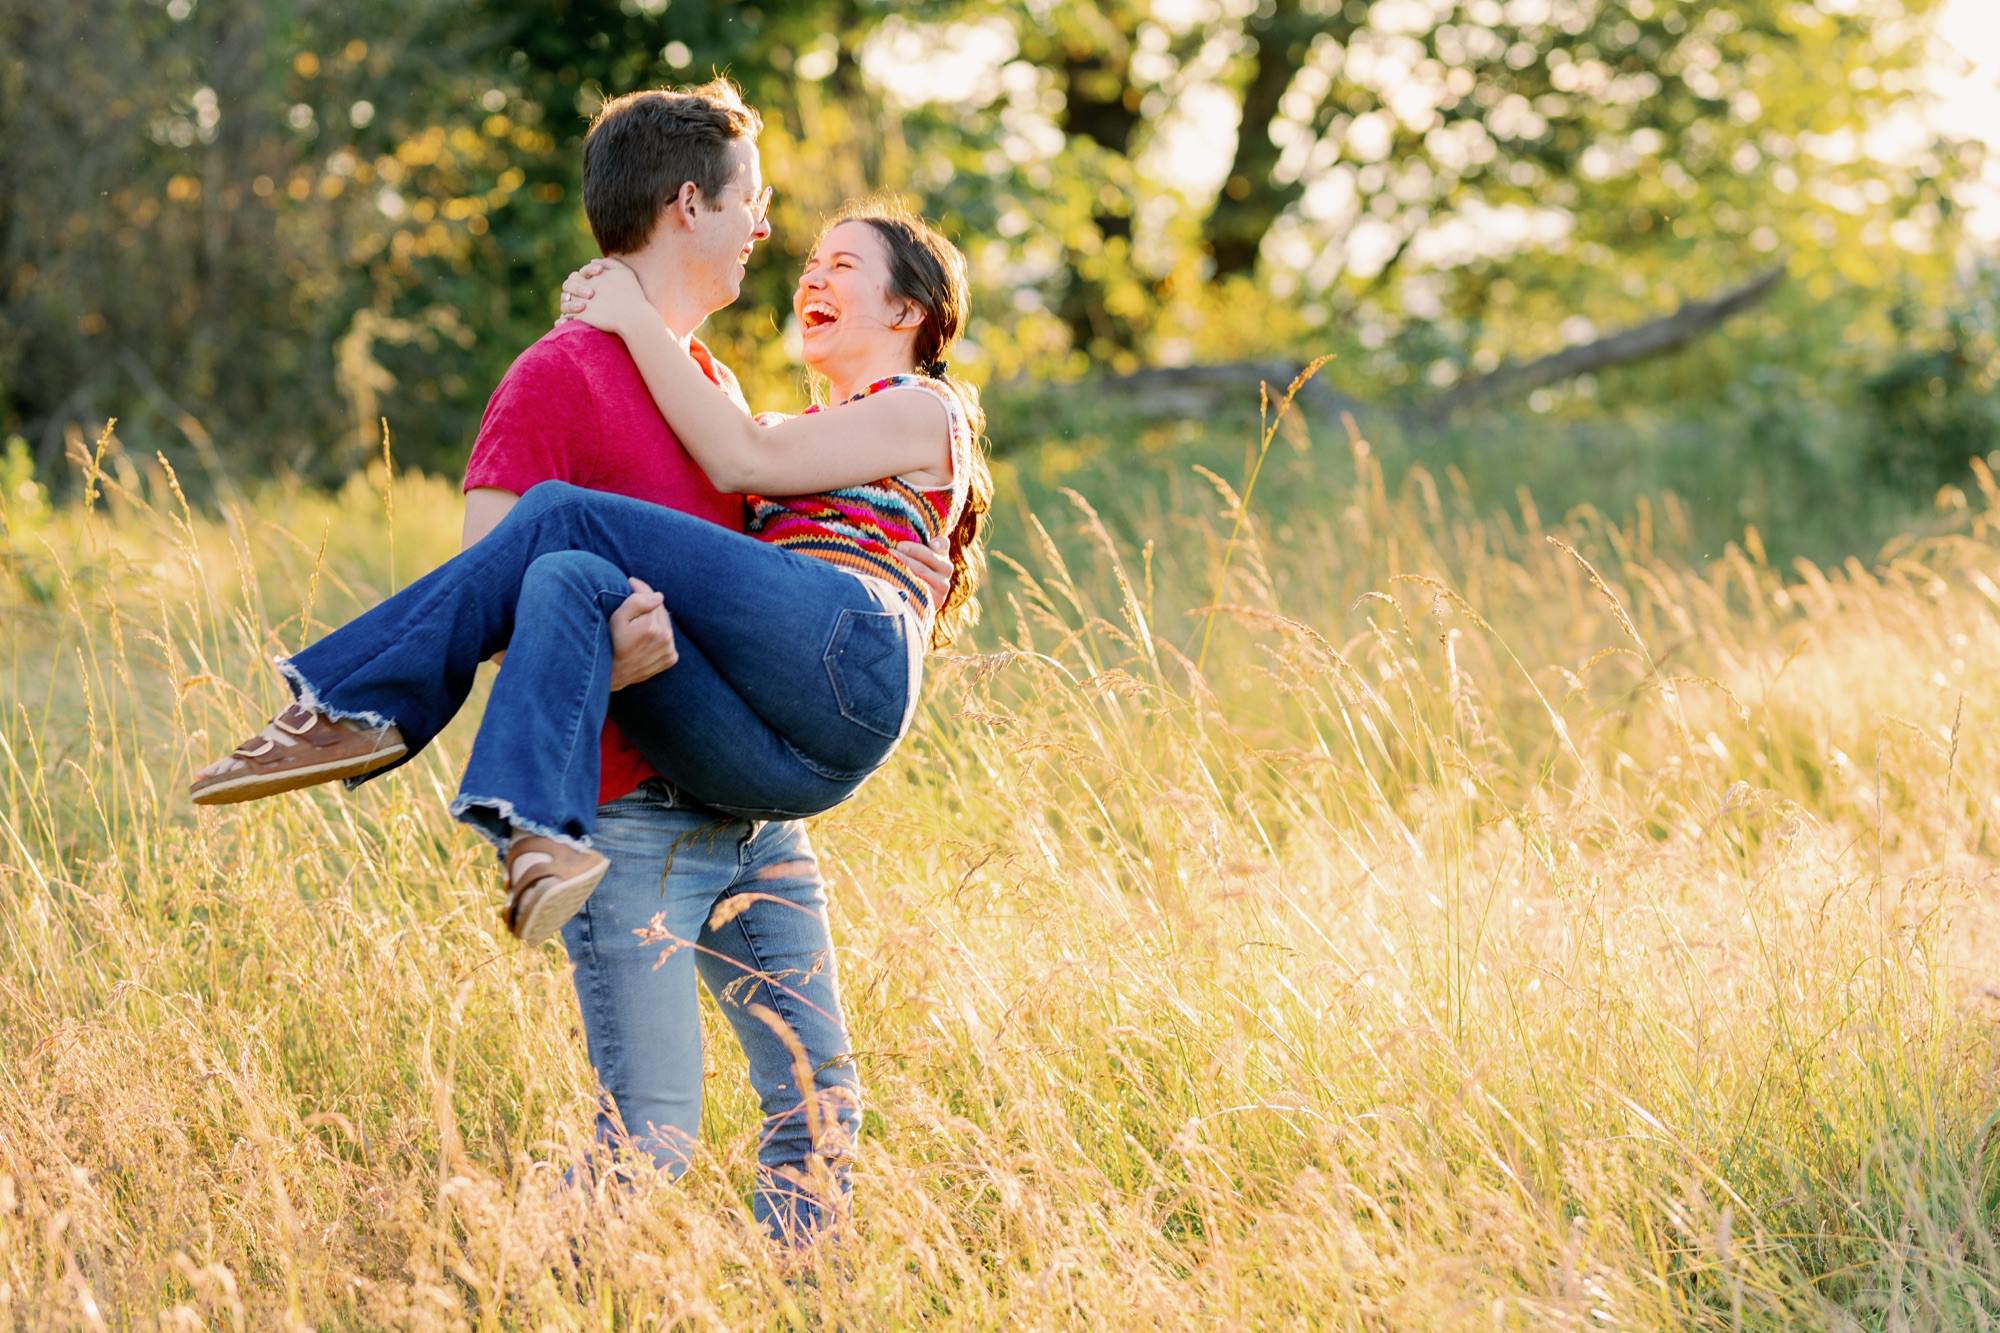 A man lifting his partner in his arms as they share a kiss, both smiling brightly in a sunny field.